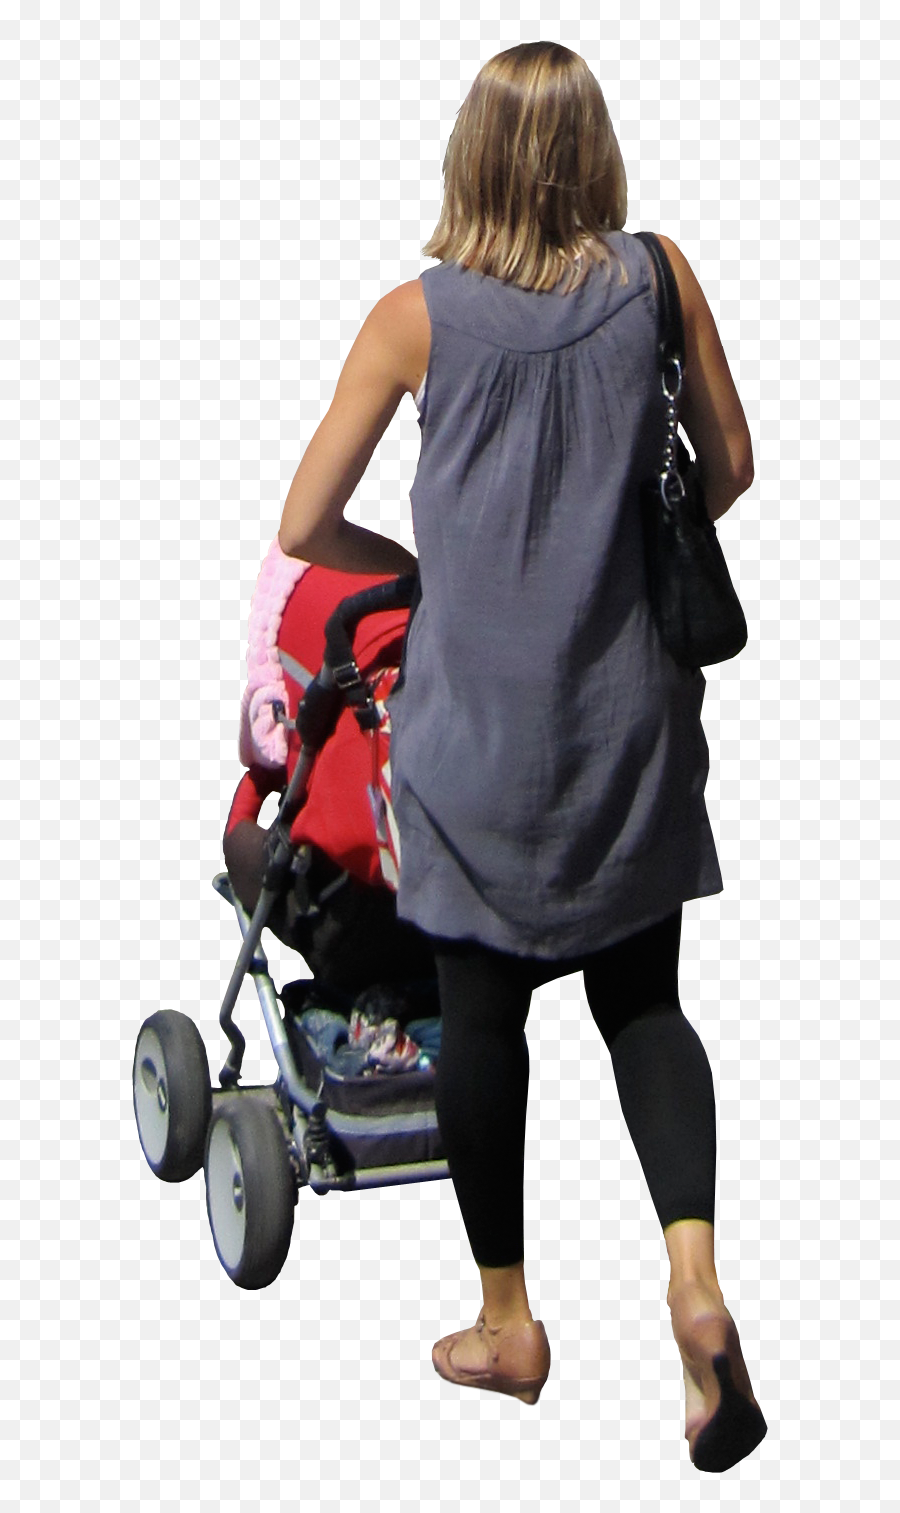 Hd Mother Pushing Her Child In A Pram - Mom With Stroller Png,Stroller Png